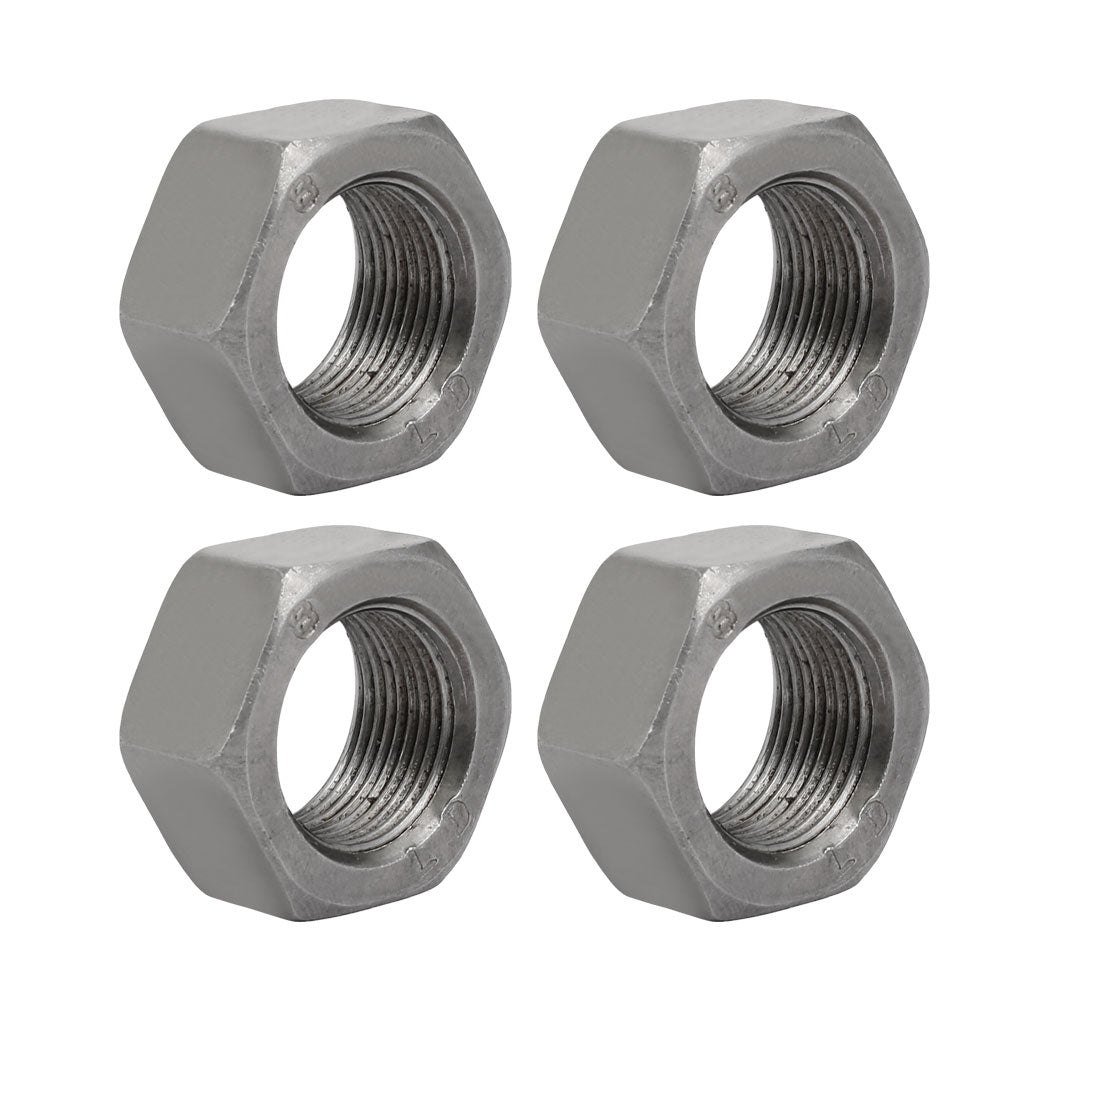 uxcell Uxcell 4pcs M22 x 1.5mm Pitch Metric Fine Thread Carbon Steel Left Hand Hex Nuts